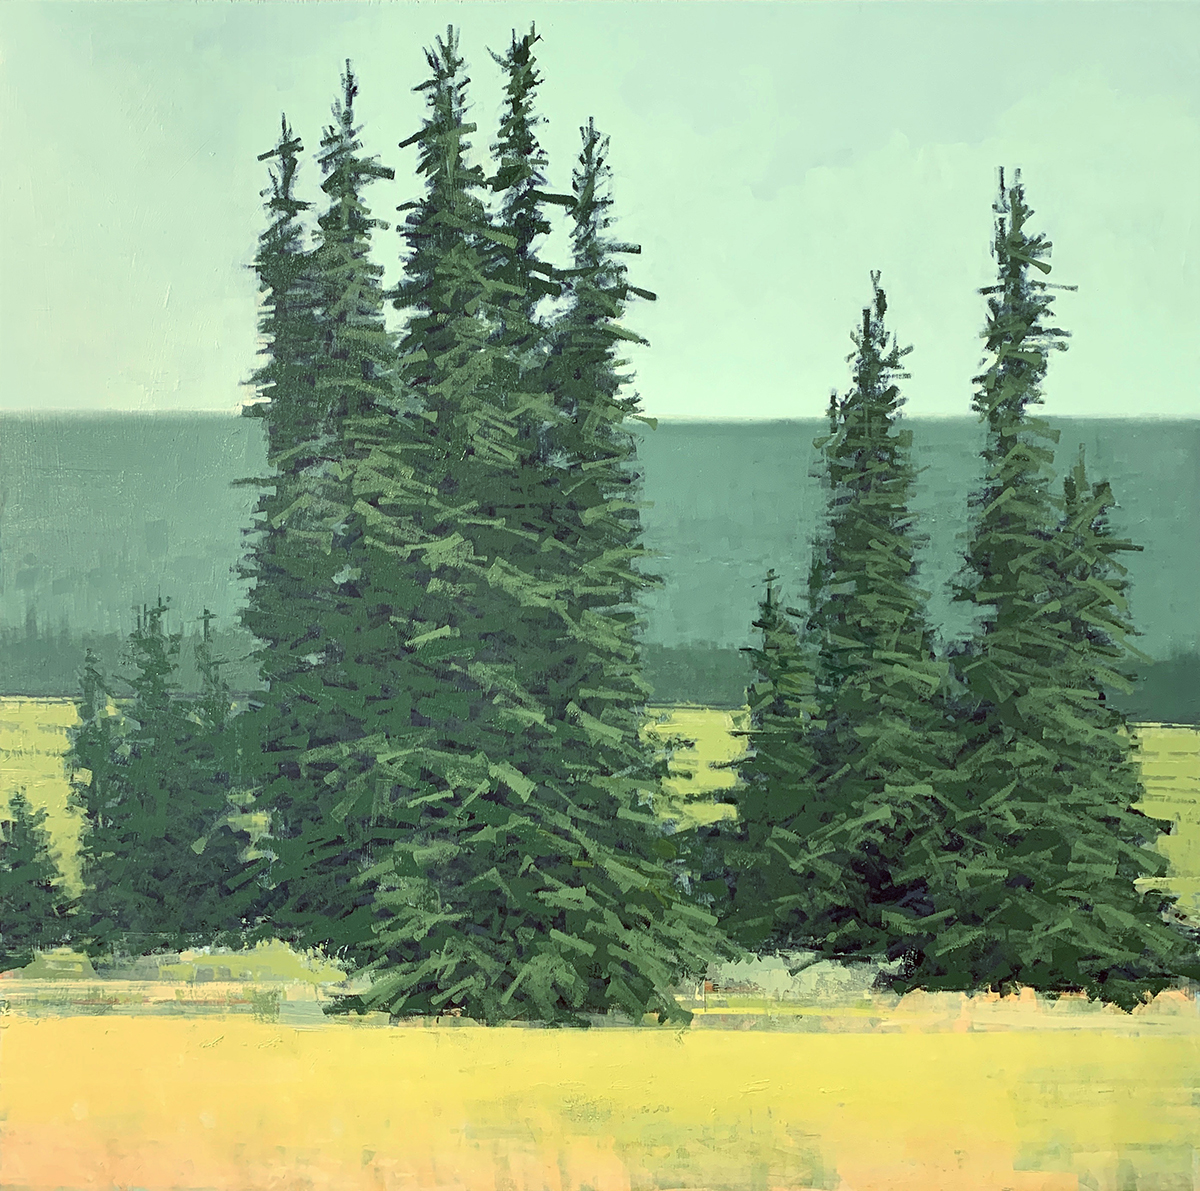 Spruces, by Patricia Kimball